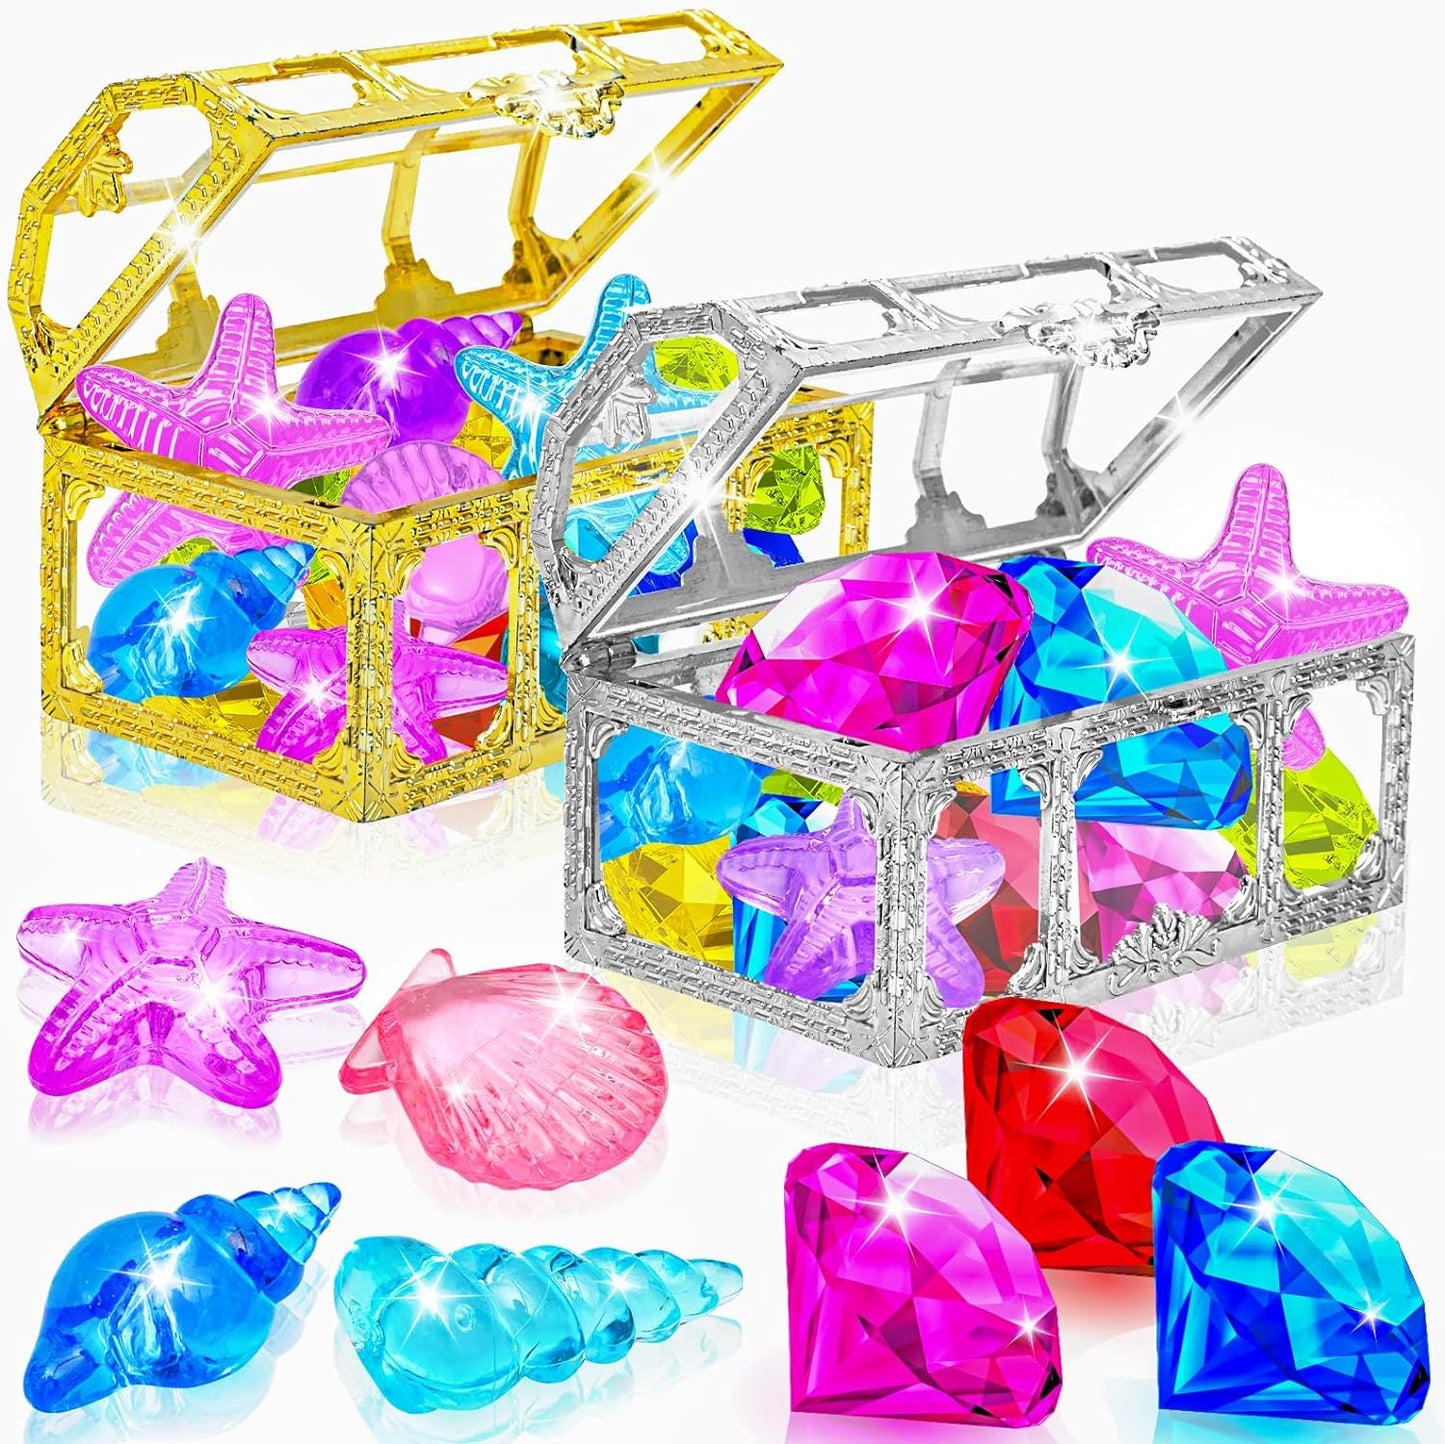 24Pcs Diving Gem Pool Toy Colorful Diamonds Set with Treasure Pirate Box Summer Underwater Swimming Toys for Boys and Girls